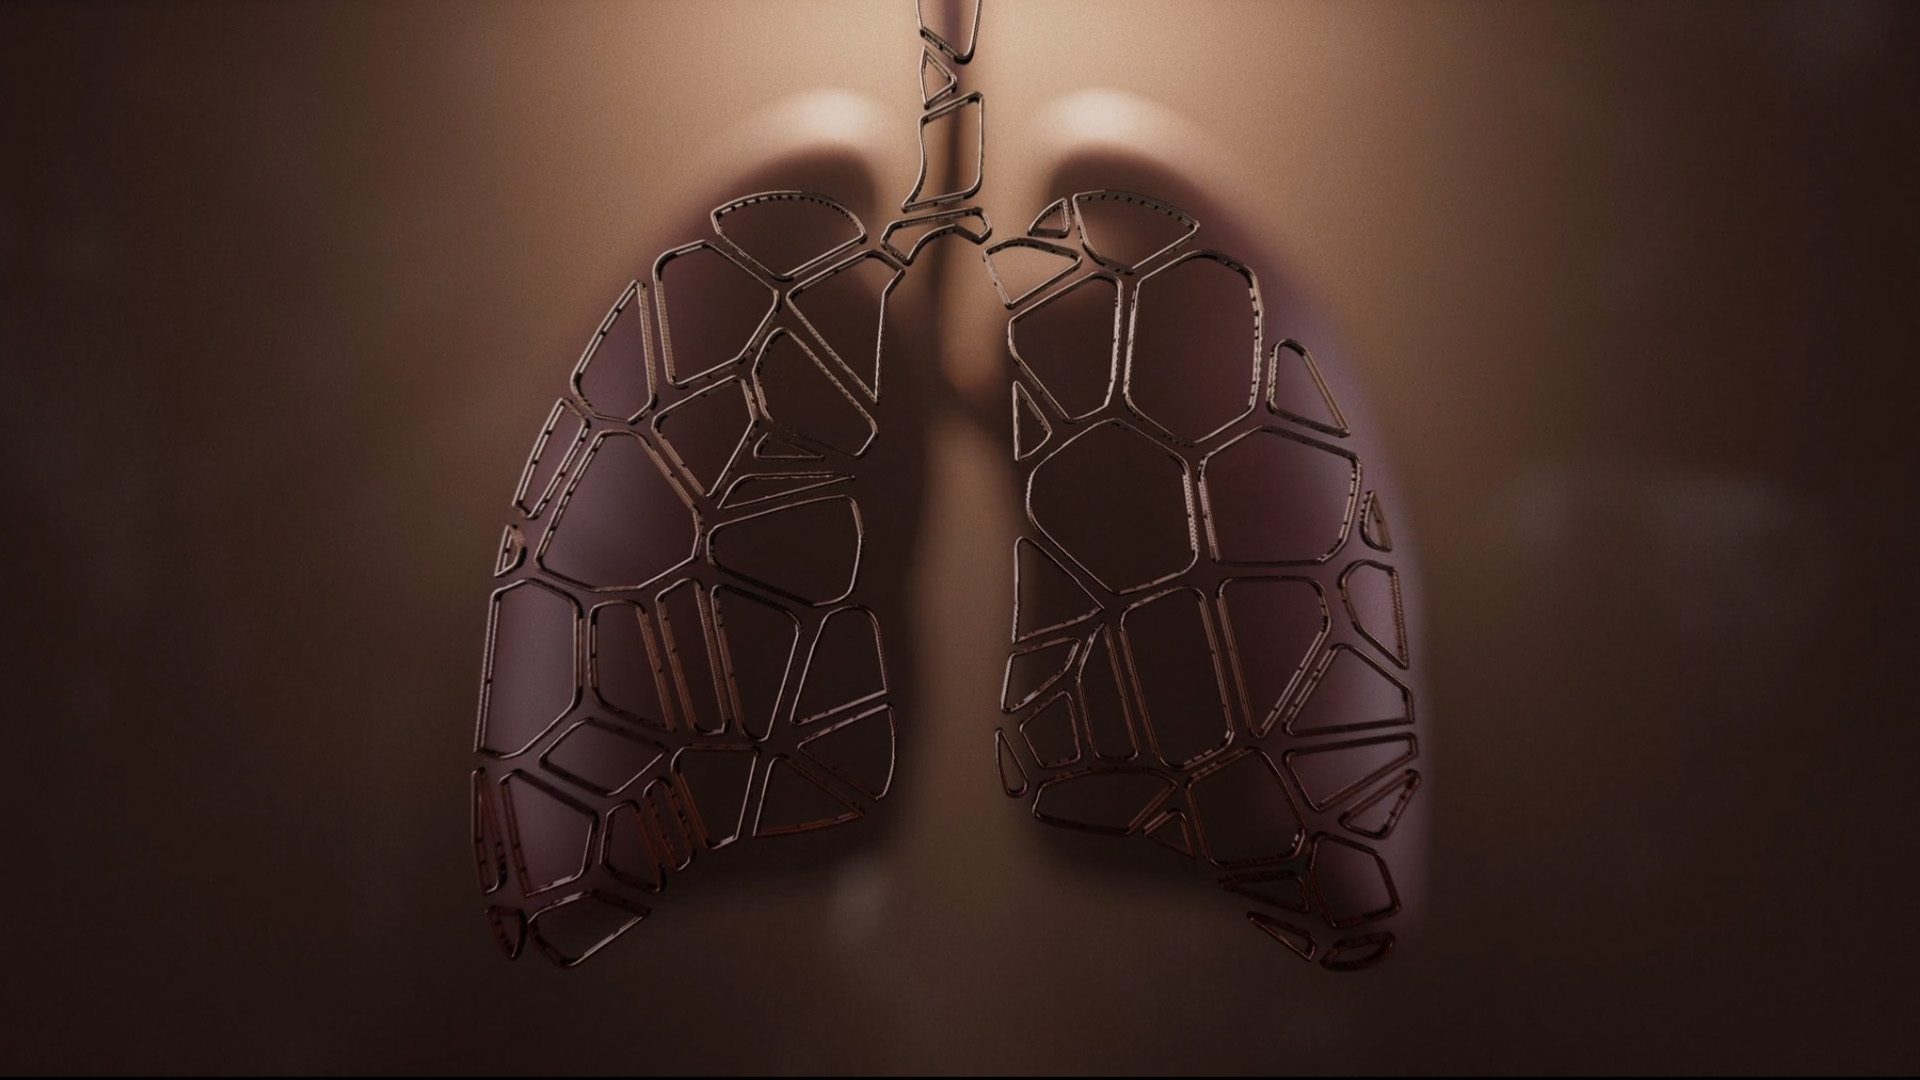 This image shows a 3D reconstruction of the human lung for Atlas of the Human Lung